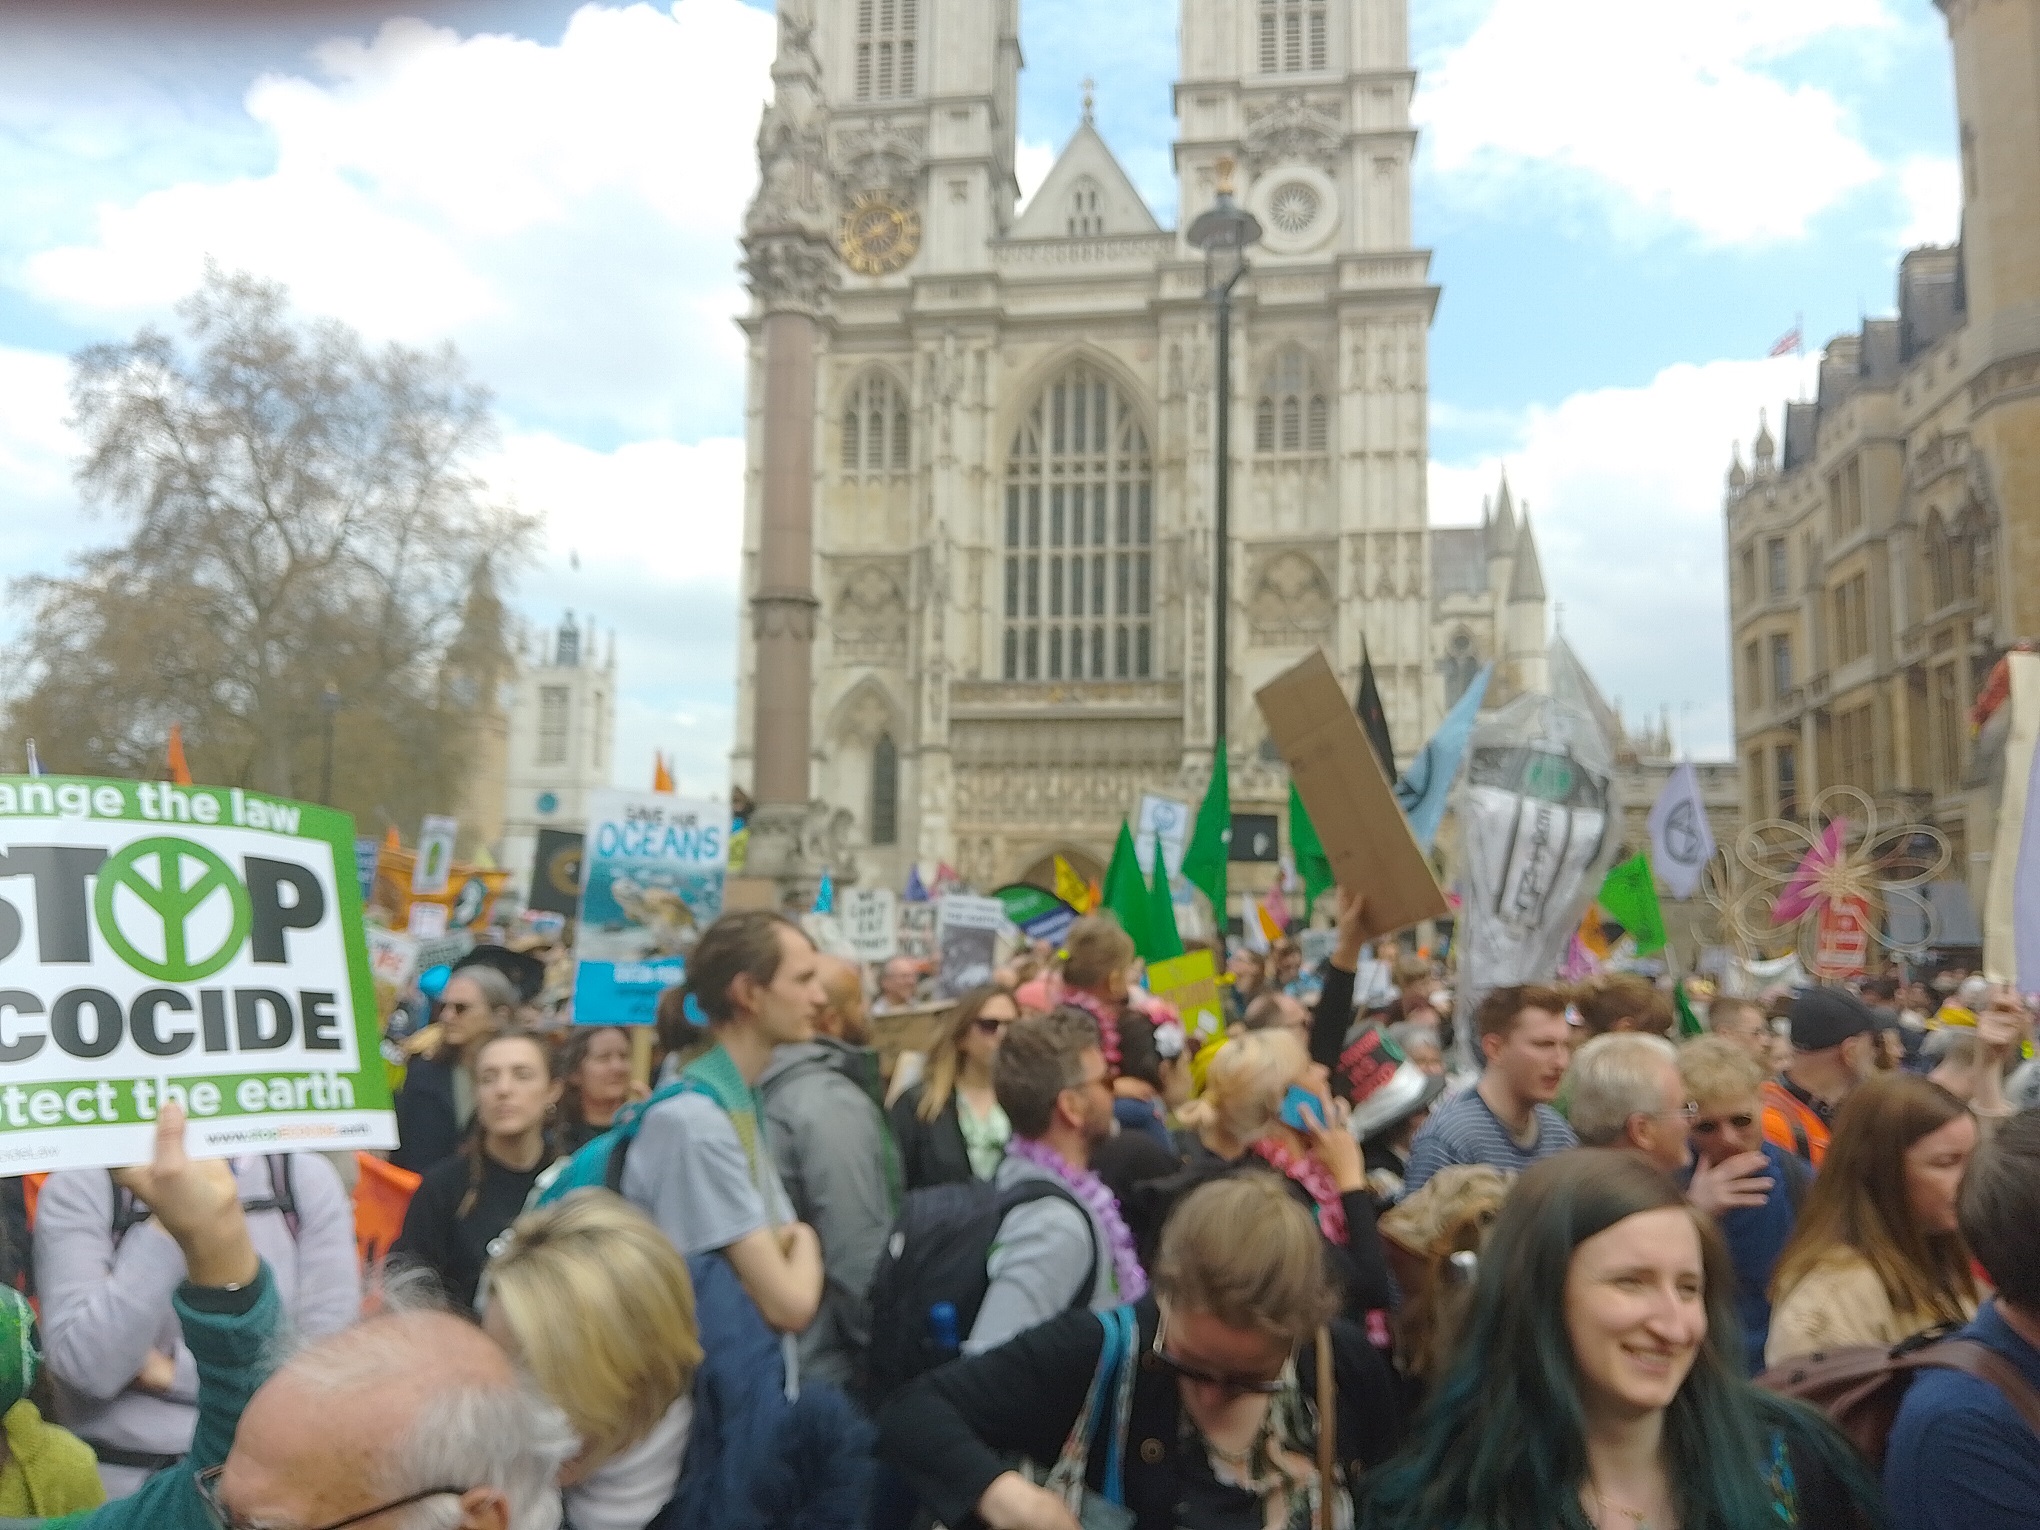 Crowd in front of Westminster Abbey